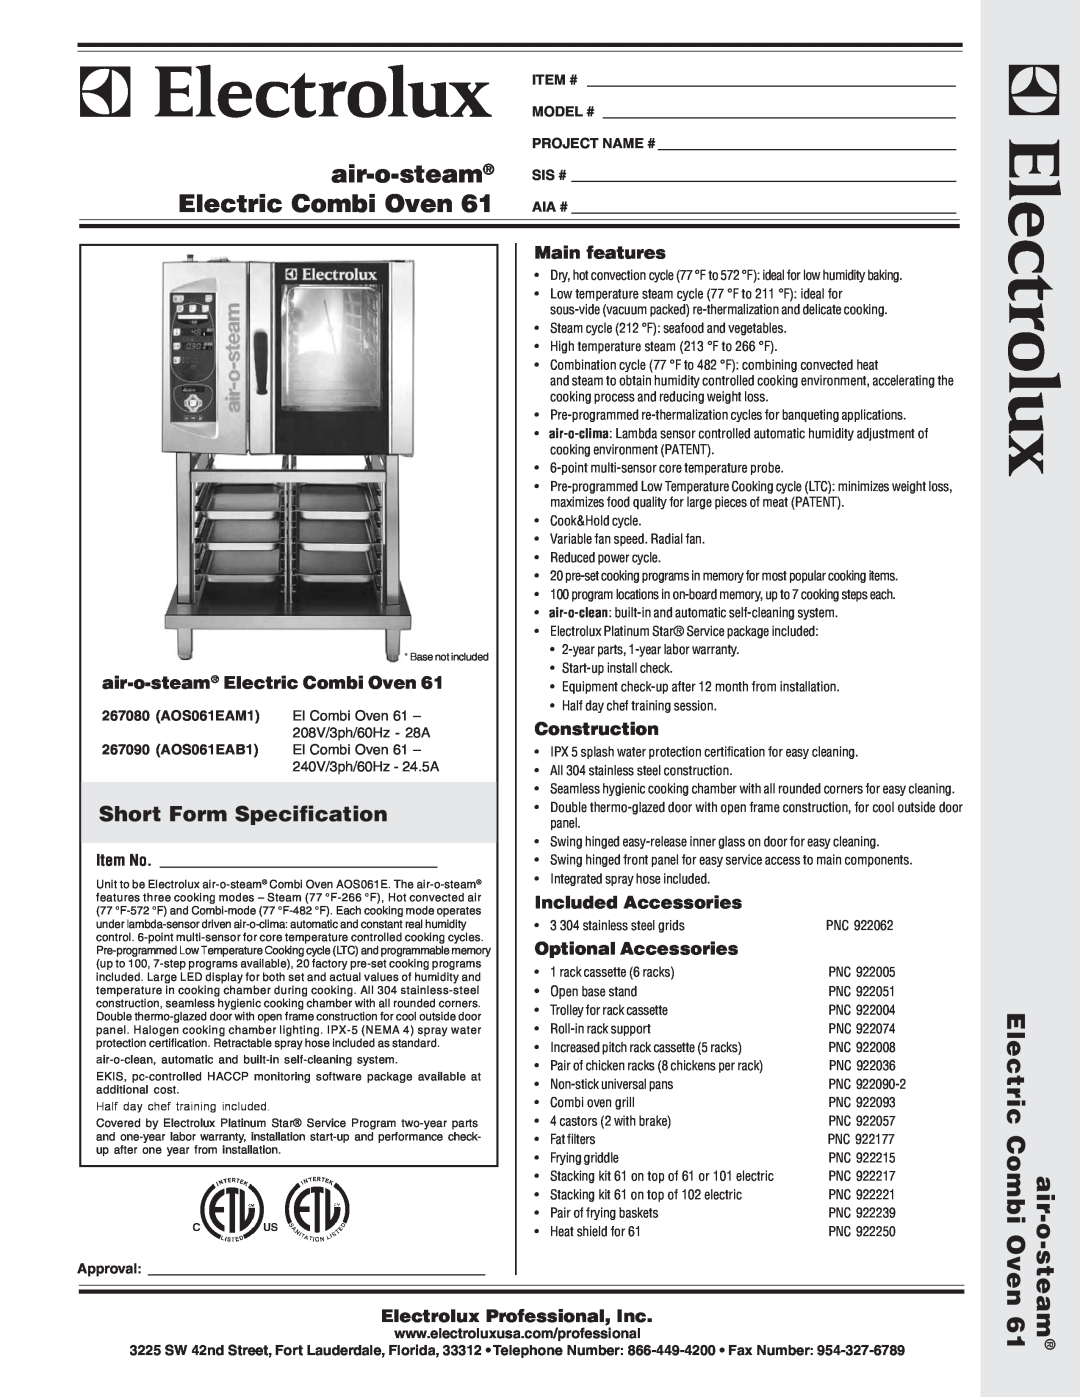 Electrolux AOS061EAB1 warranty Short Form Specification, air-o-steam Electric Combi Oven, Main features, Construction 